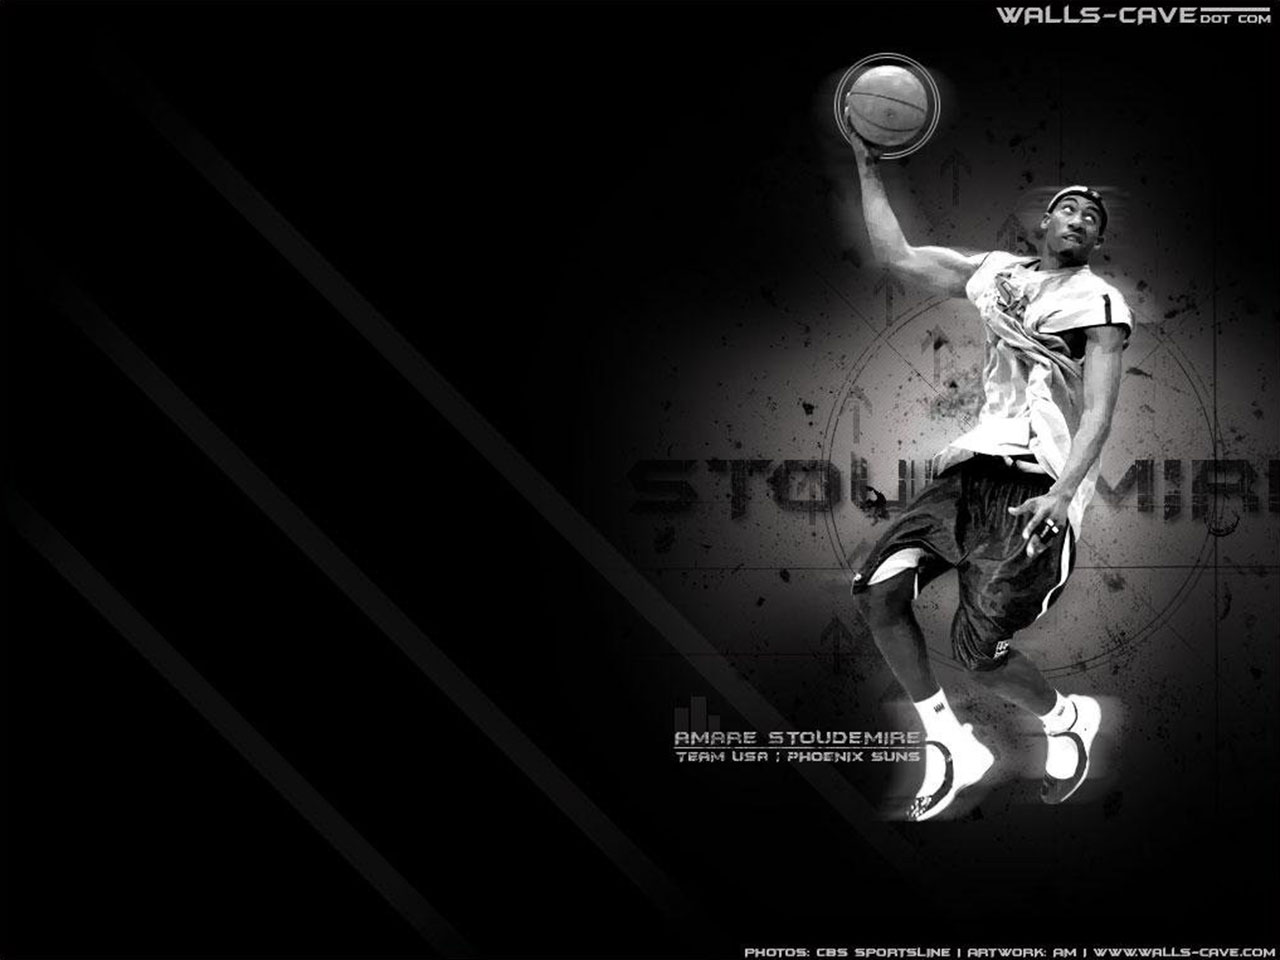 amare stoudemire Amare Stoudemire - "My game is made outside" Nike Commercial